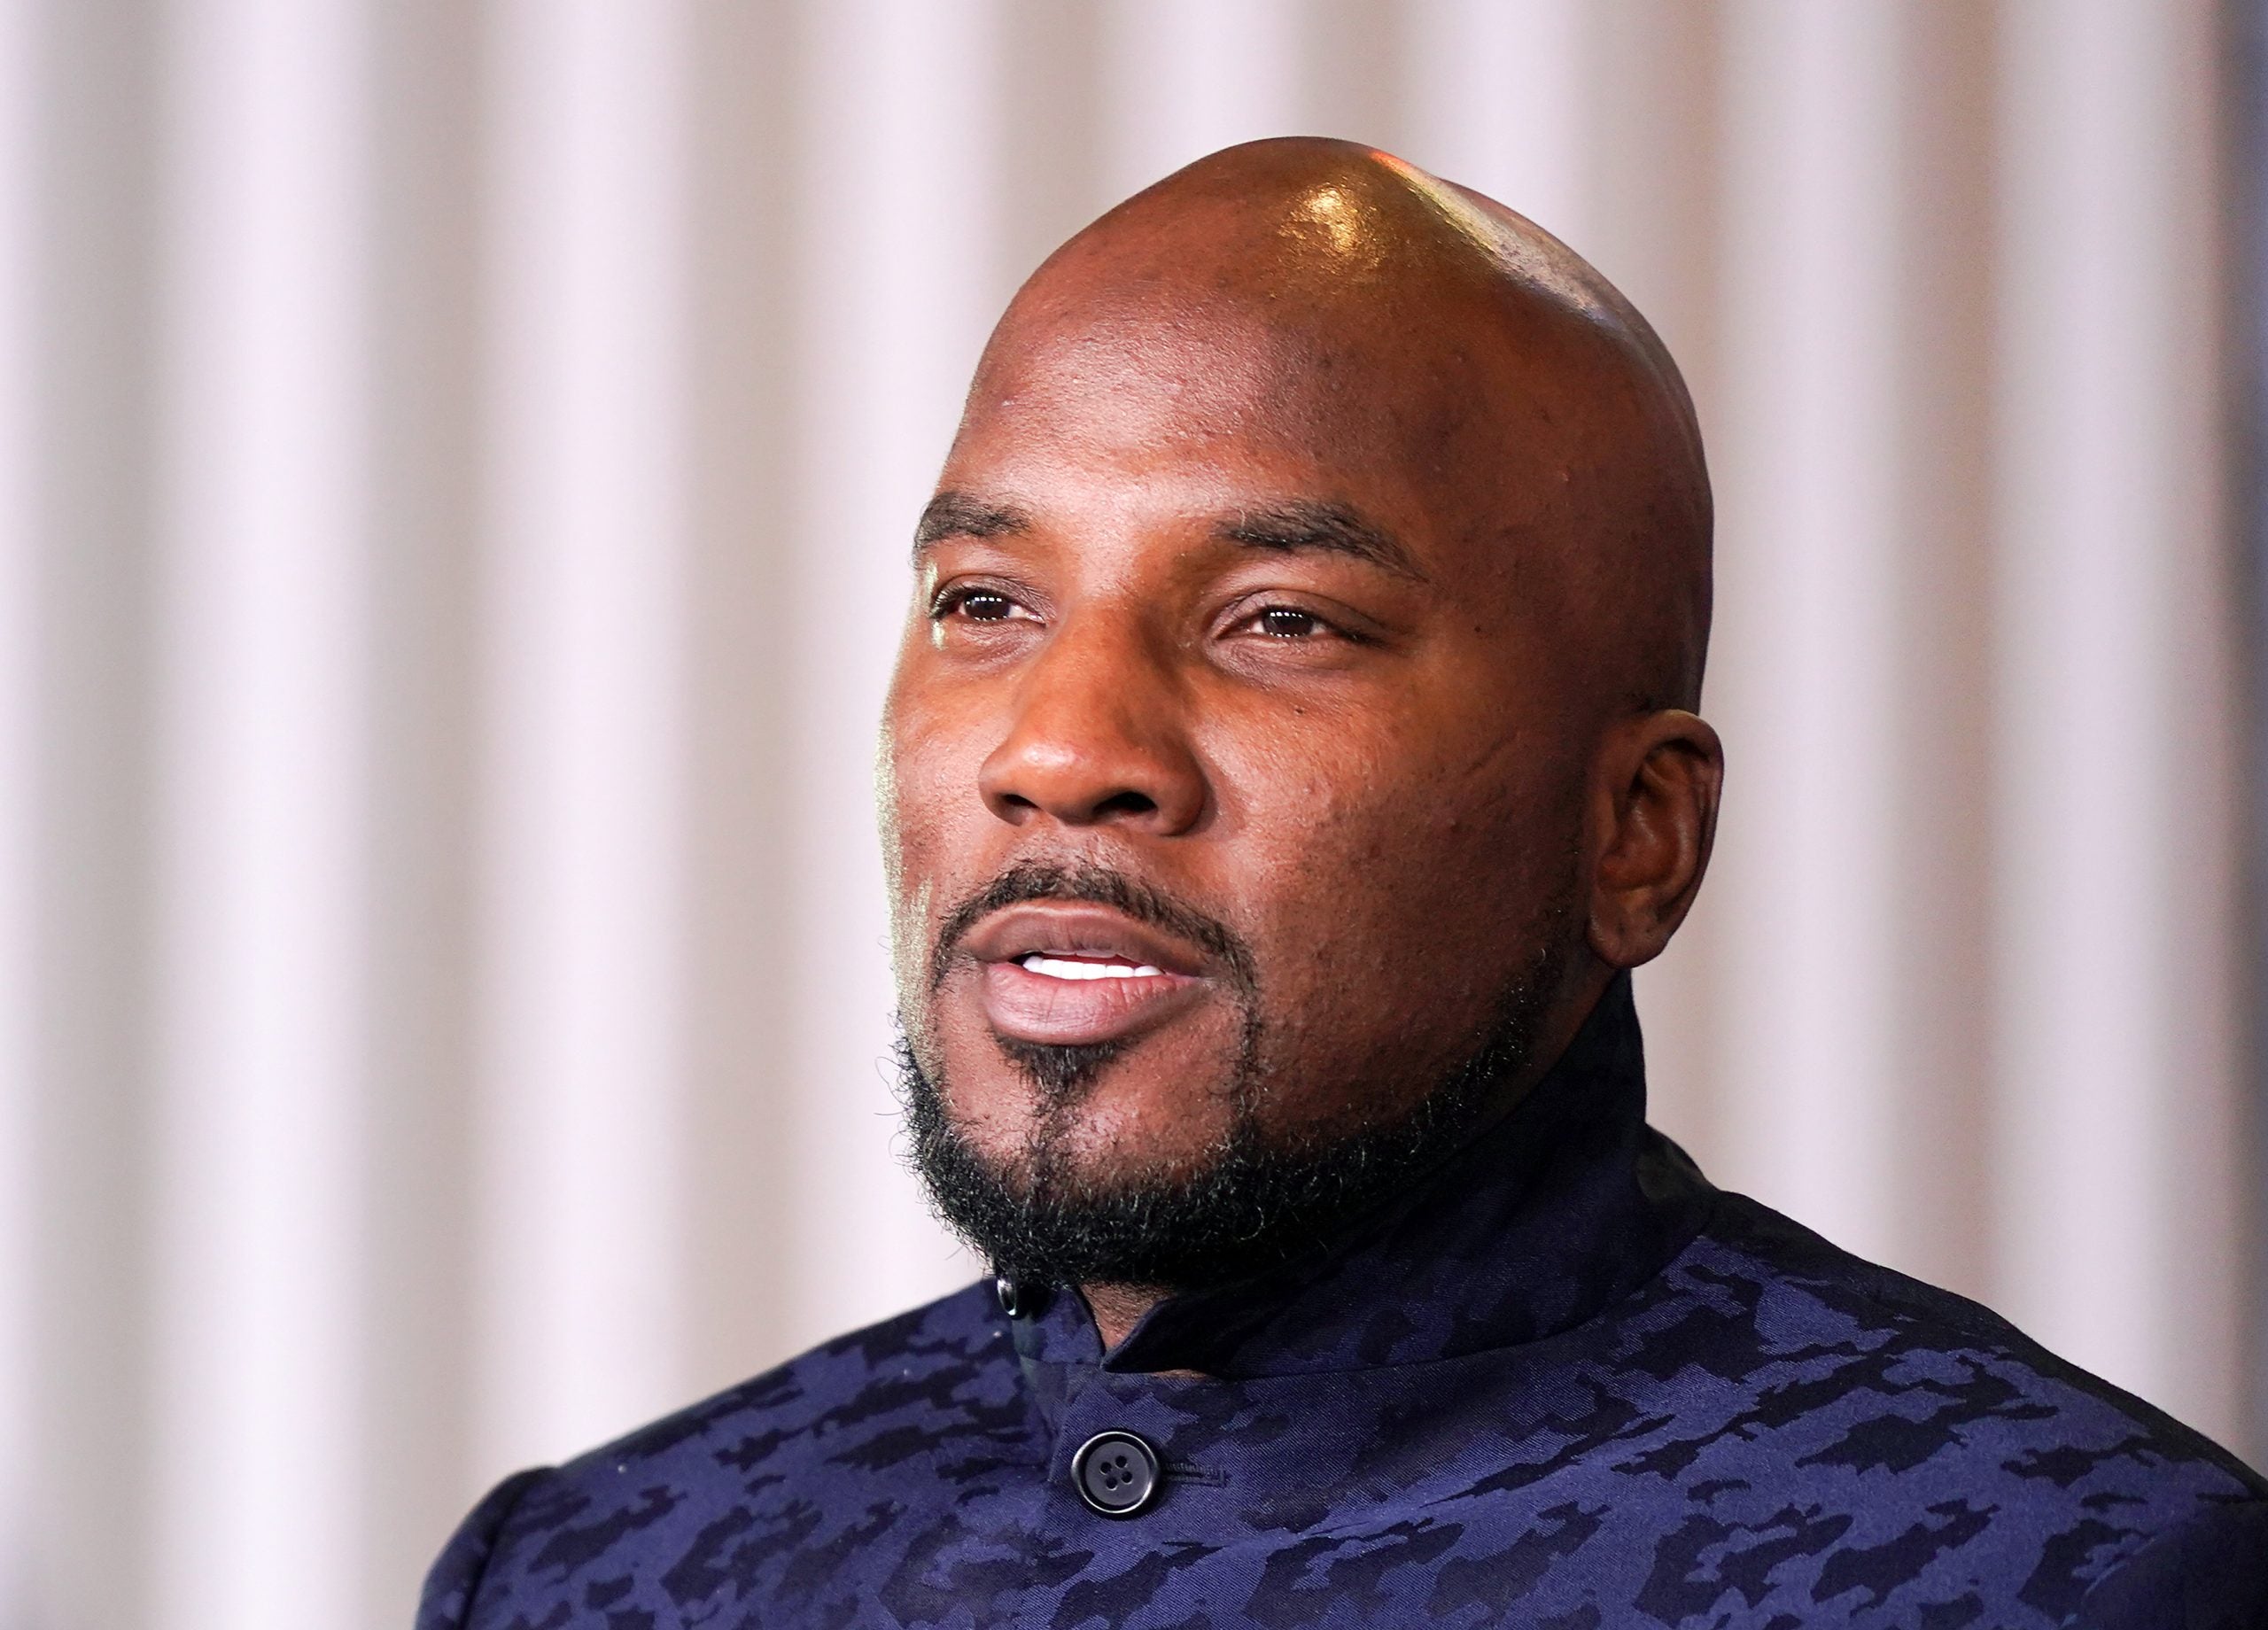 Jeezy On Voting: 'It's Time To Step Up'